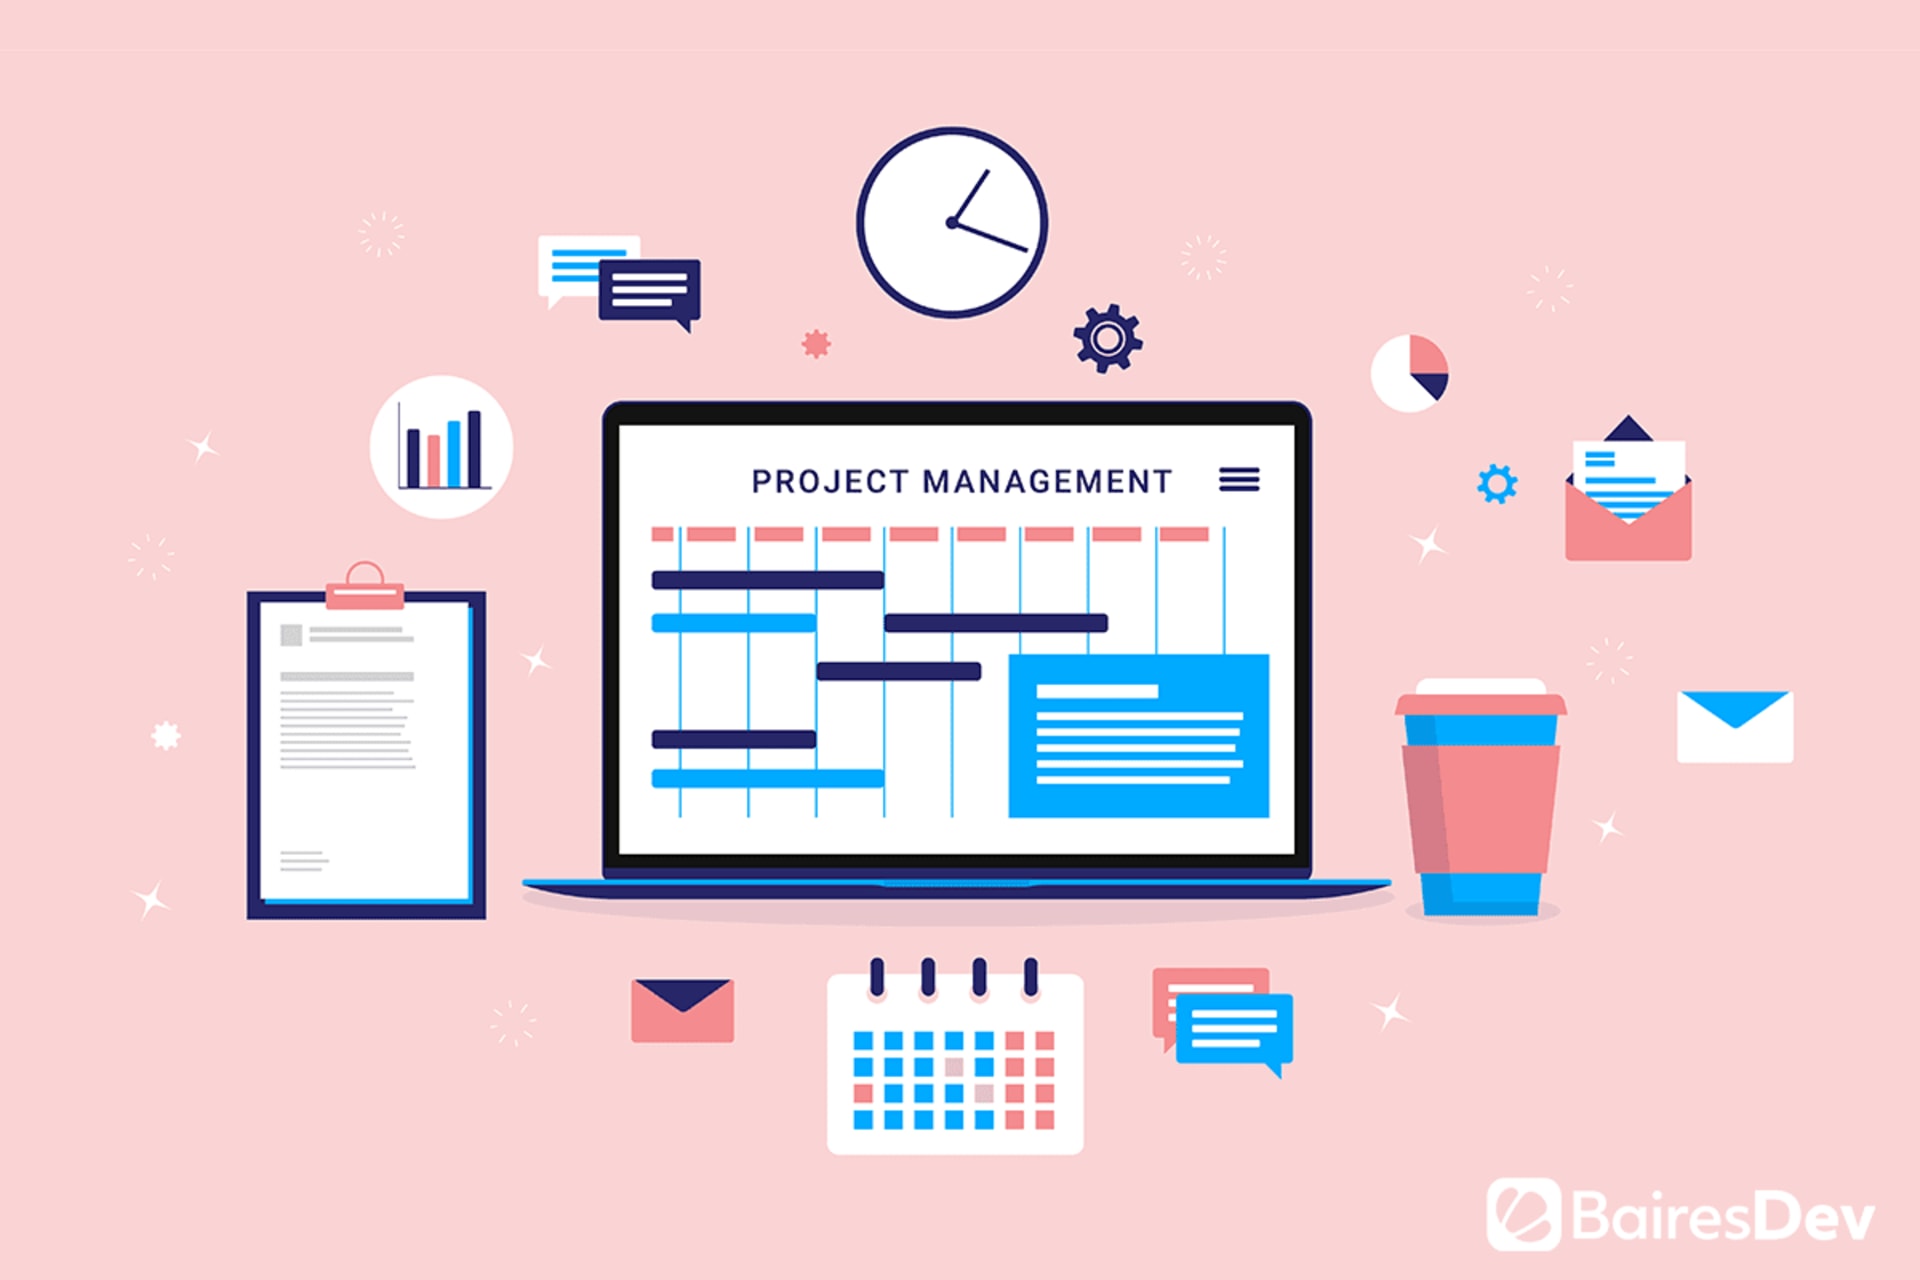 Technical Debt in Project Management